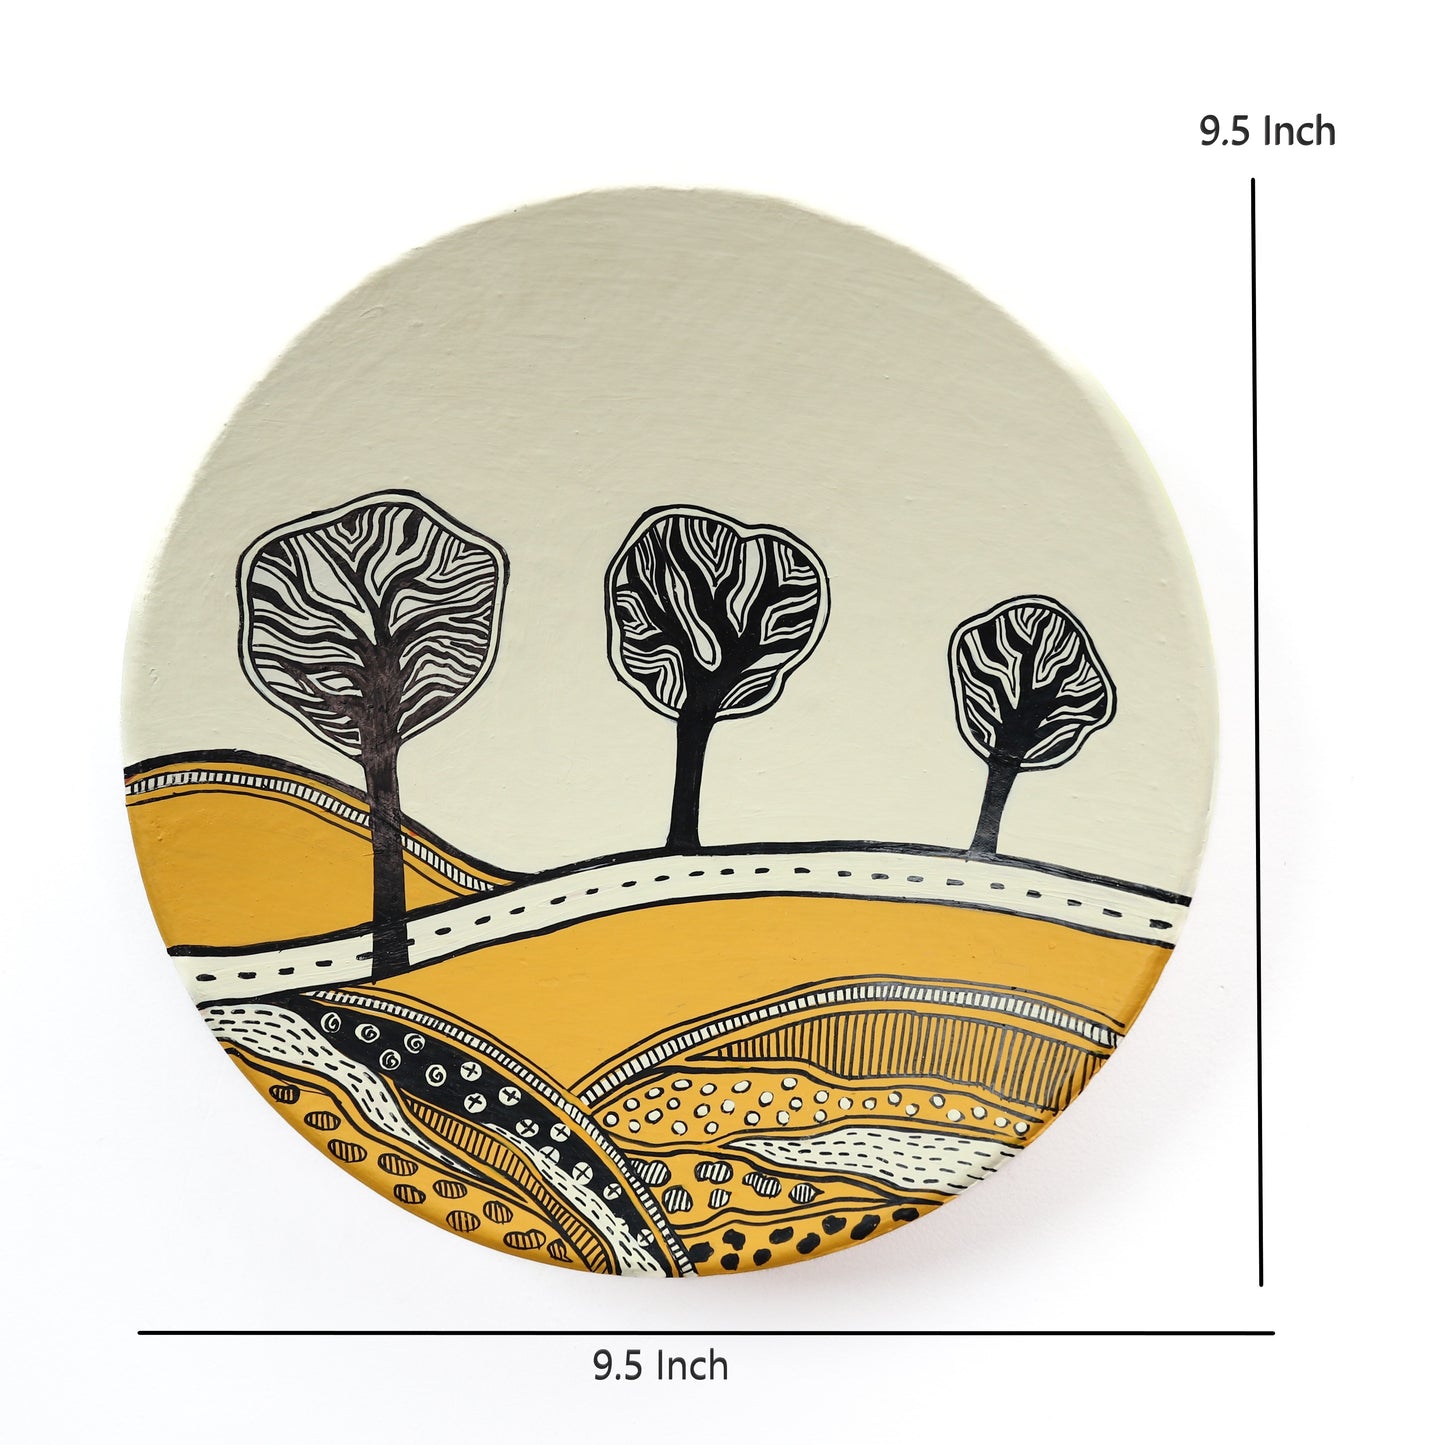 'Tree of Life' Handpainted Terracotta Decorative Wall Plate, 9.5 Inch